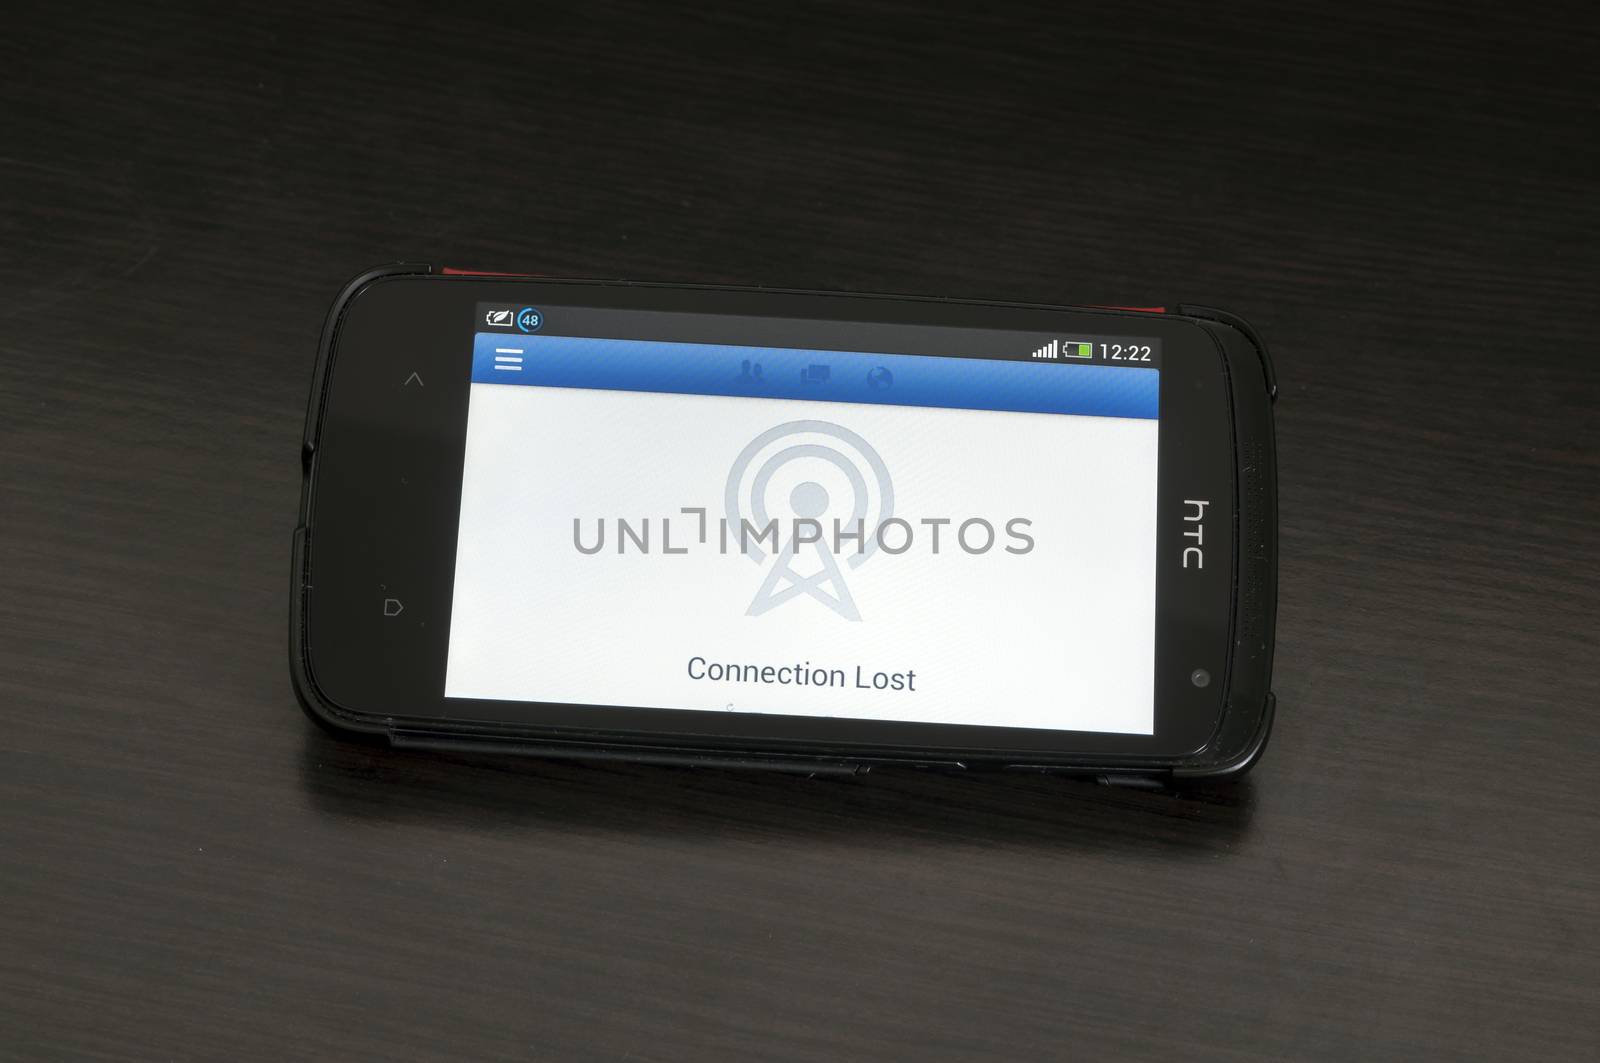 Bucharest, Romania - January 28, 2014: Photo of a HTC Desire device, showing the Connection Lost logo on the Facebook app for Android devices.